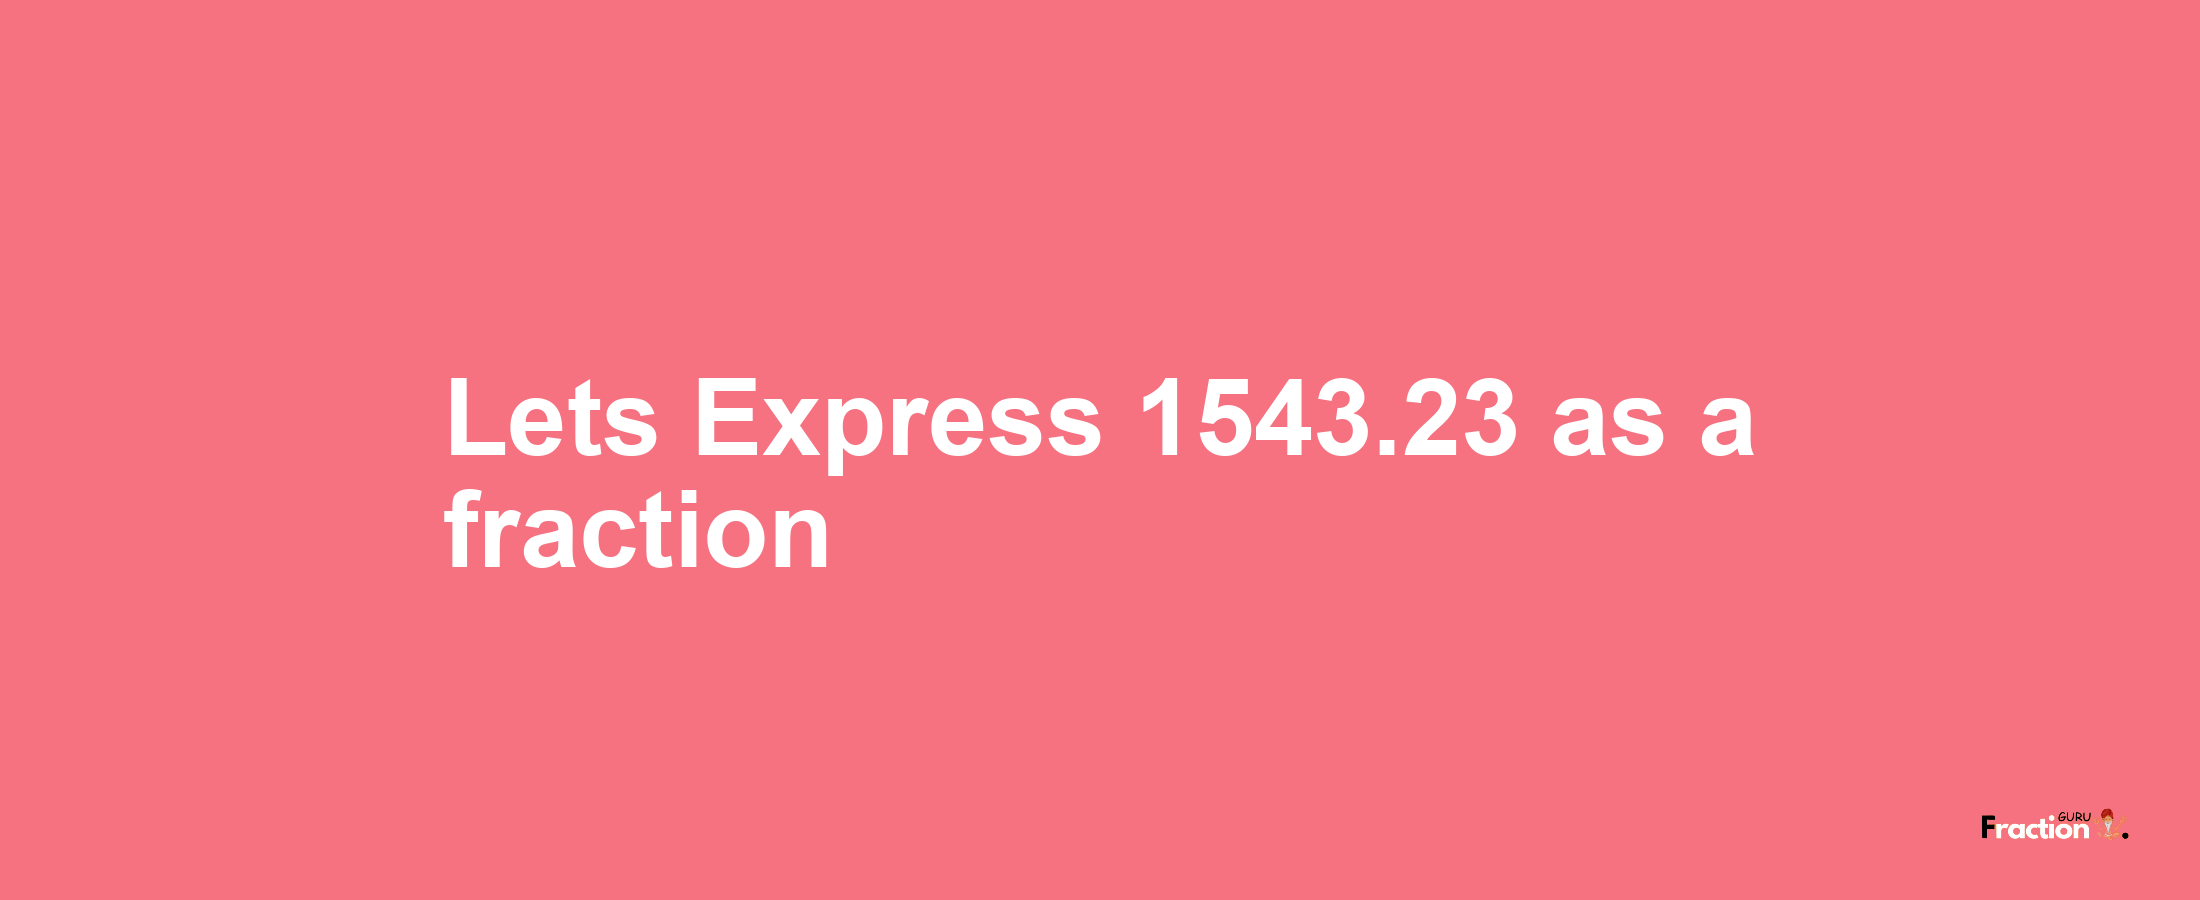 Lets Express 1543.23 as afraction